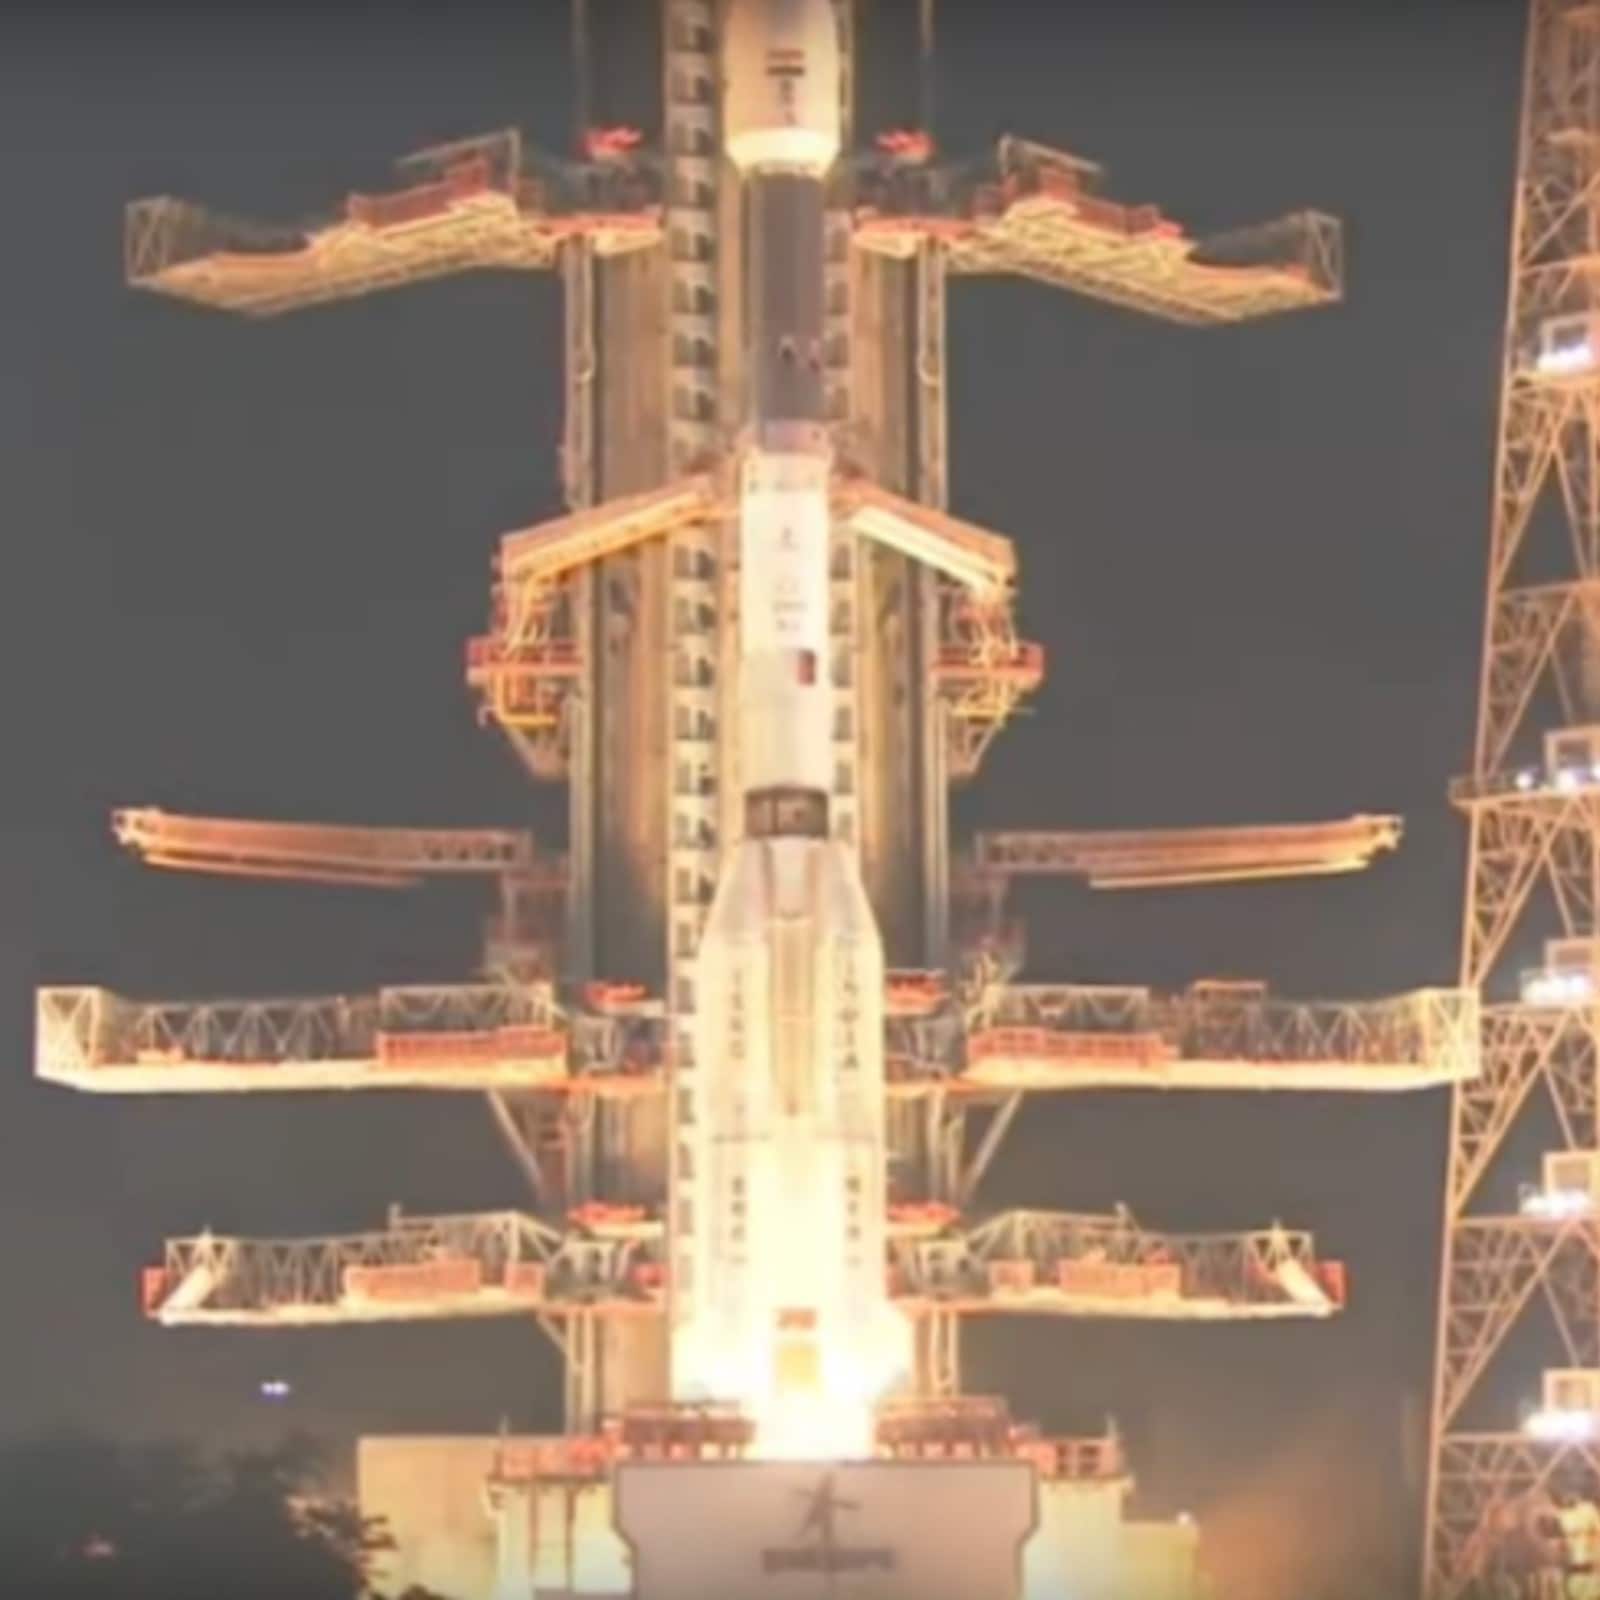 EXPLAINED: Why ISRO Had Called GSLV Its 'Naughty Boy' And What Launch Failure Means For India